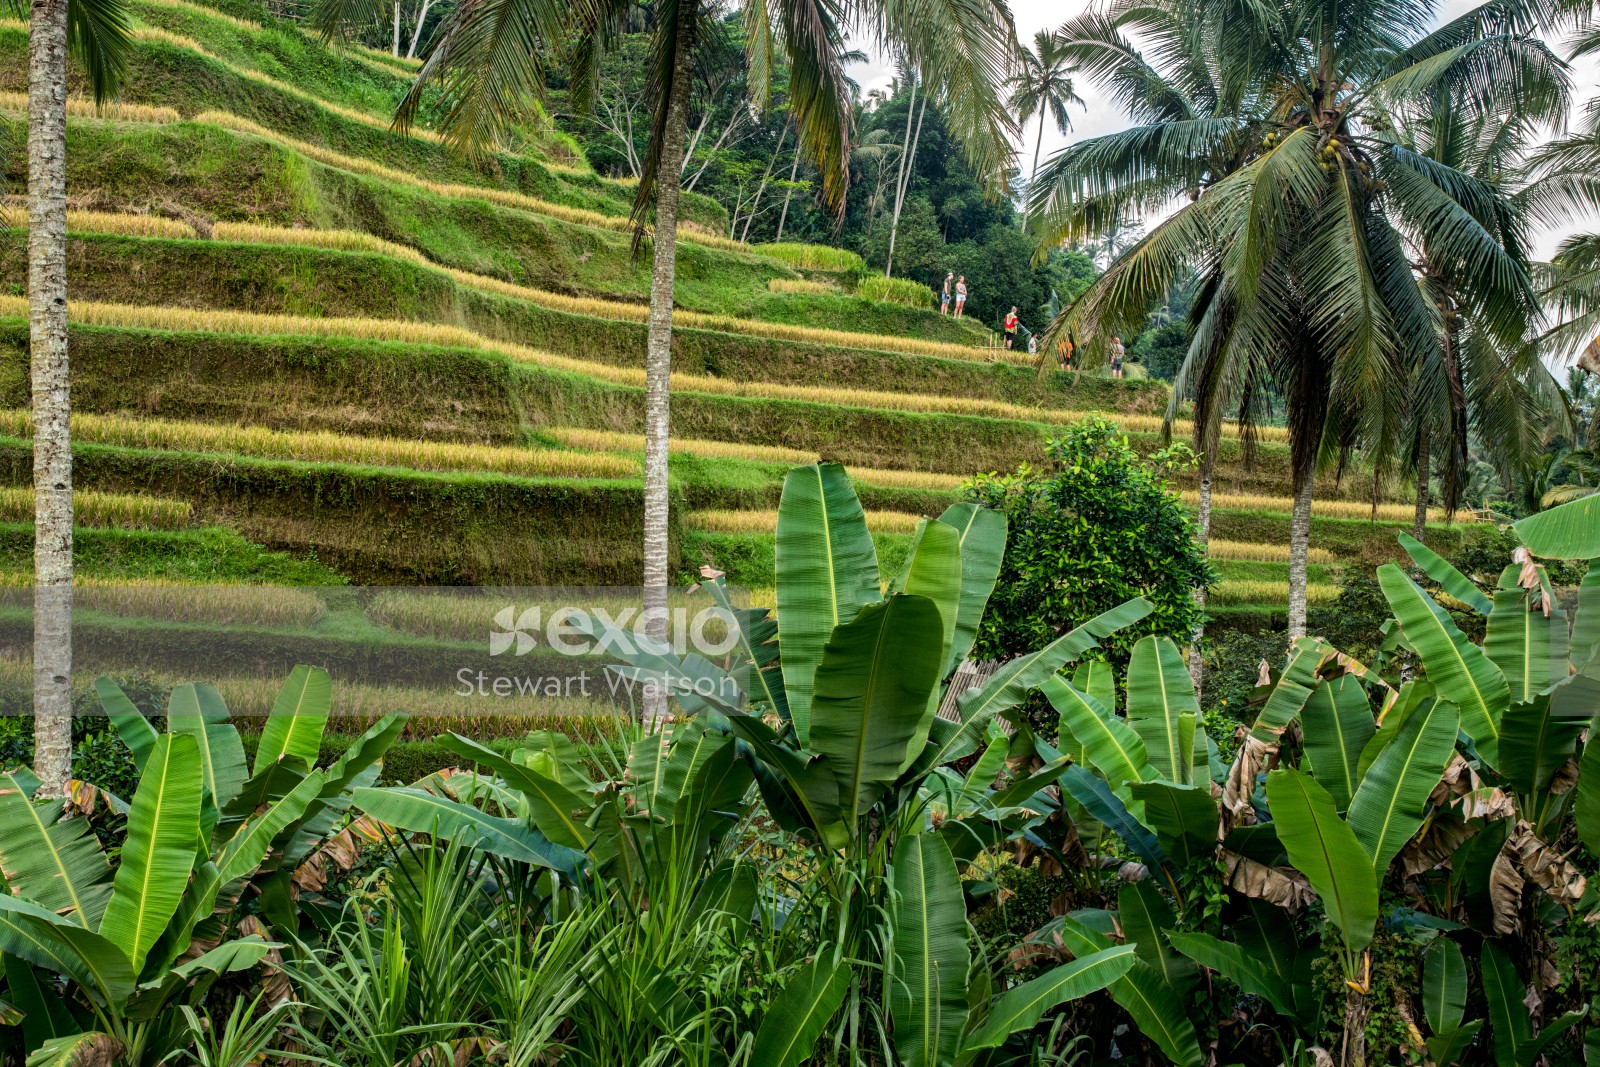 Palm and banana trees in the rice field